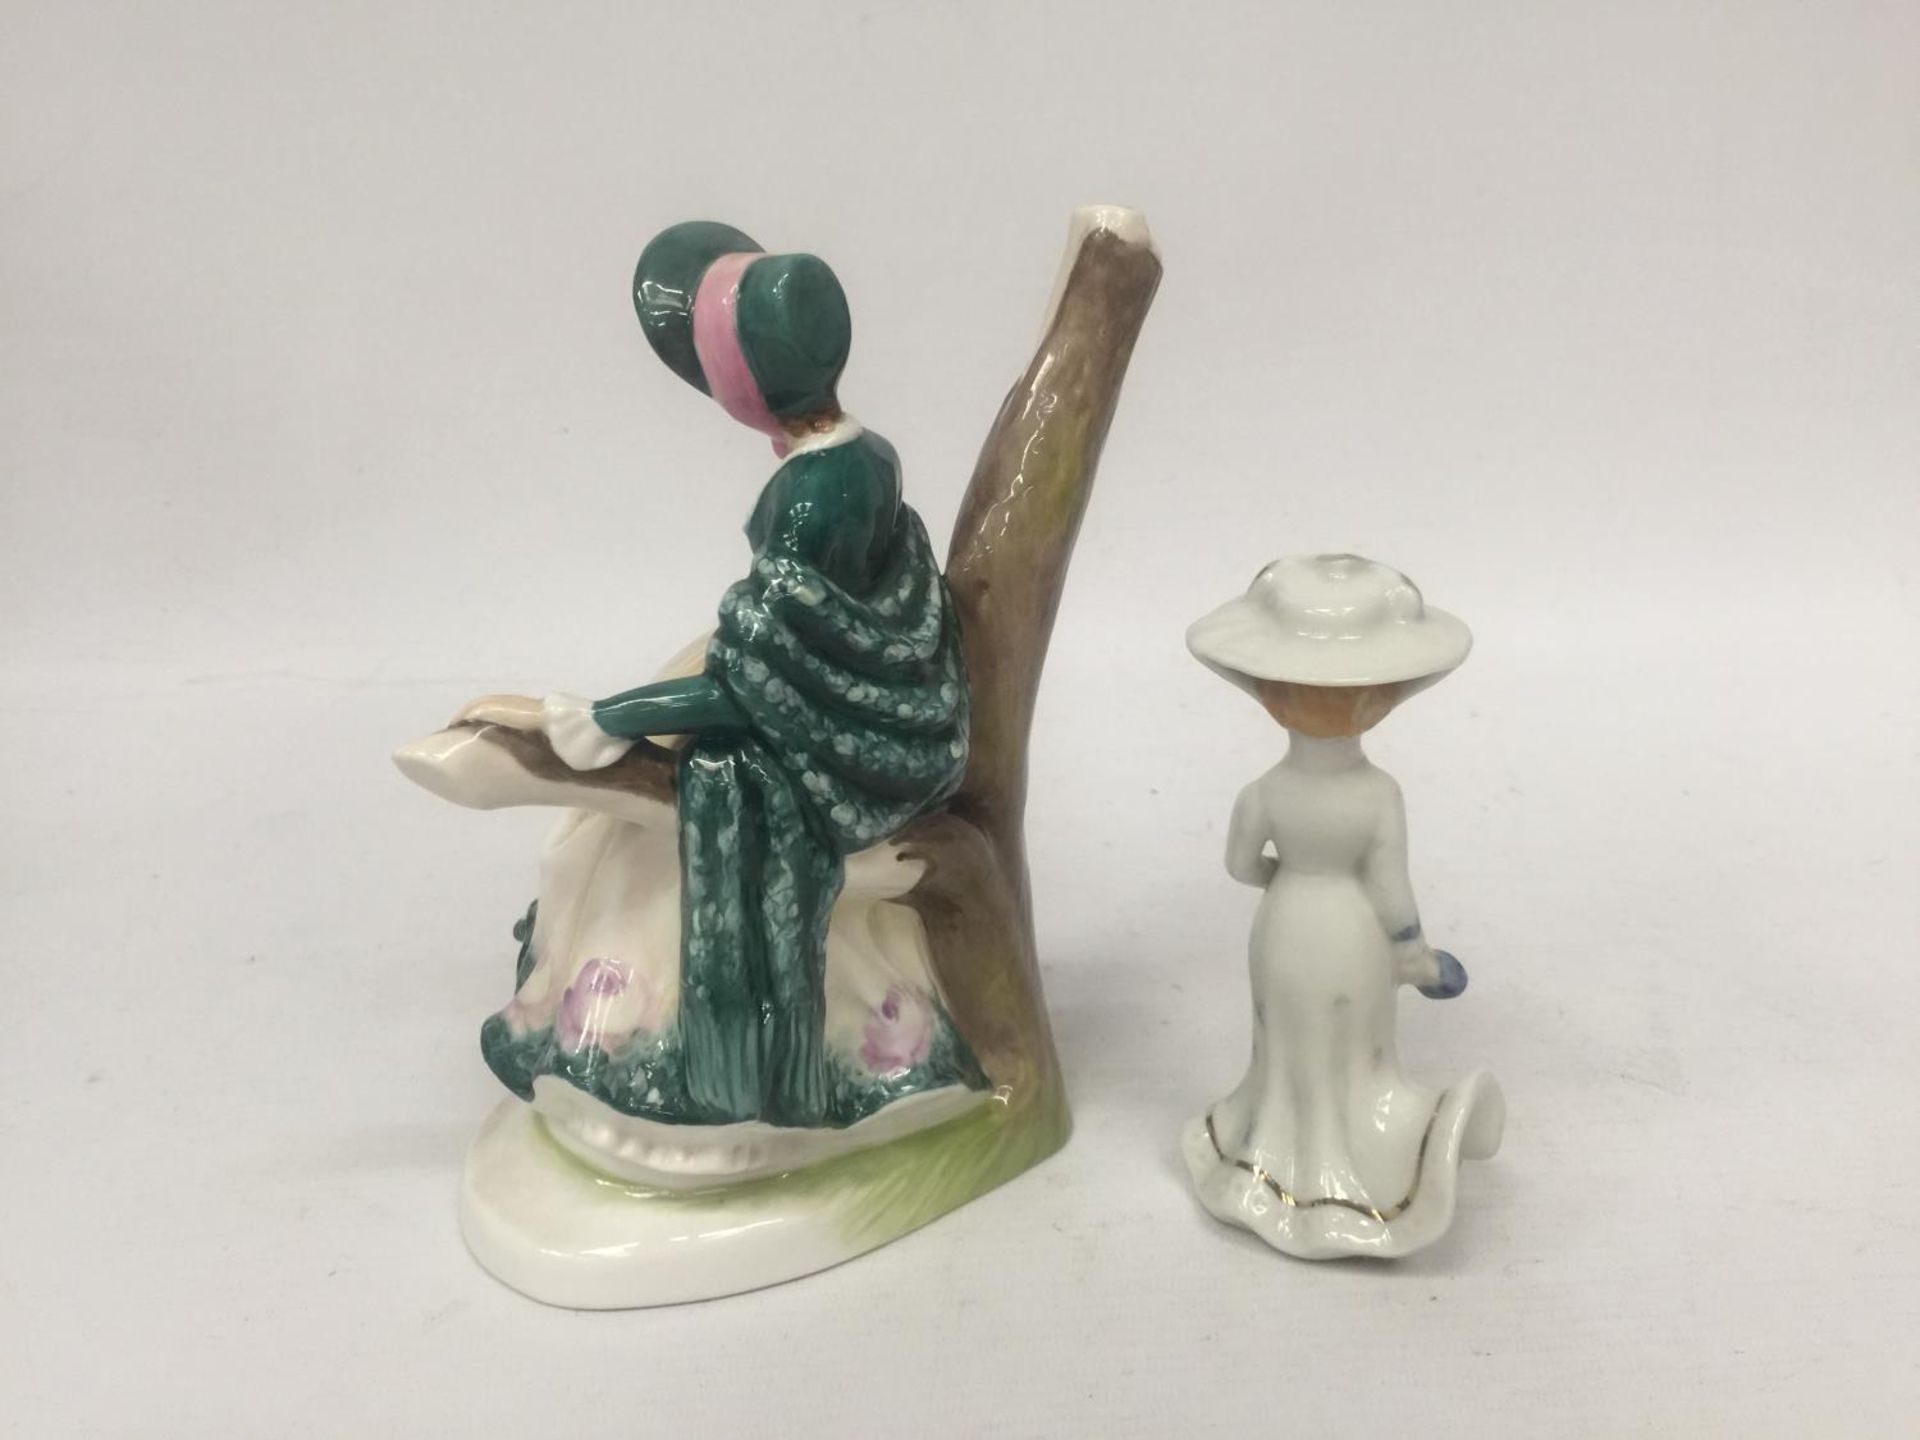 A FINE BONE CHINA FIGURE OF A LADY SITTING IN A BRANCH "EMILY" TOGETHER WITH A SMALL PORCELAIN LADY - Image 3 of 4